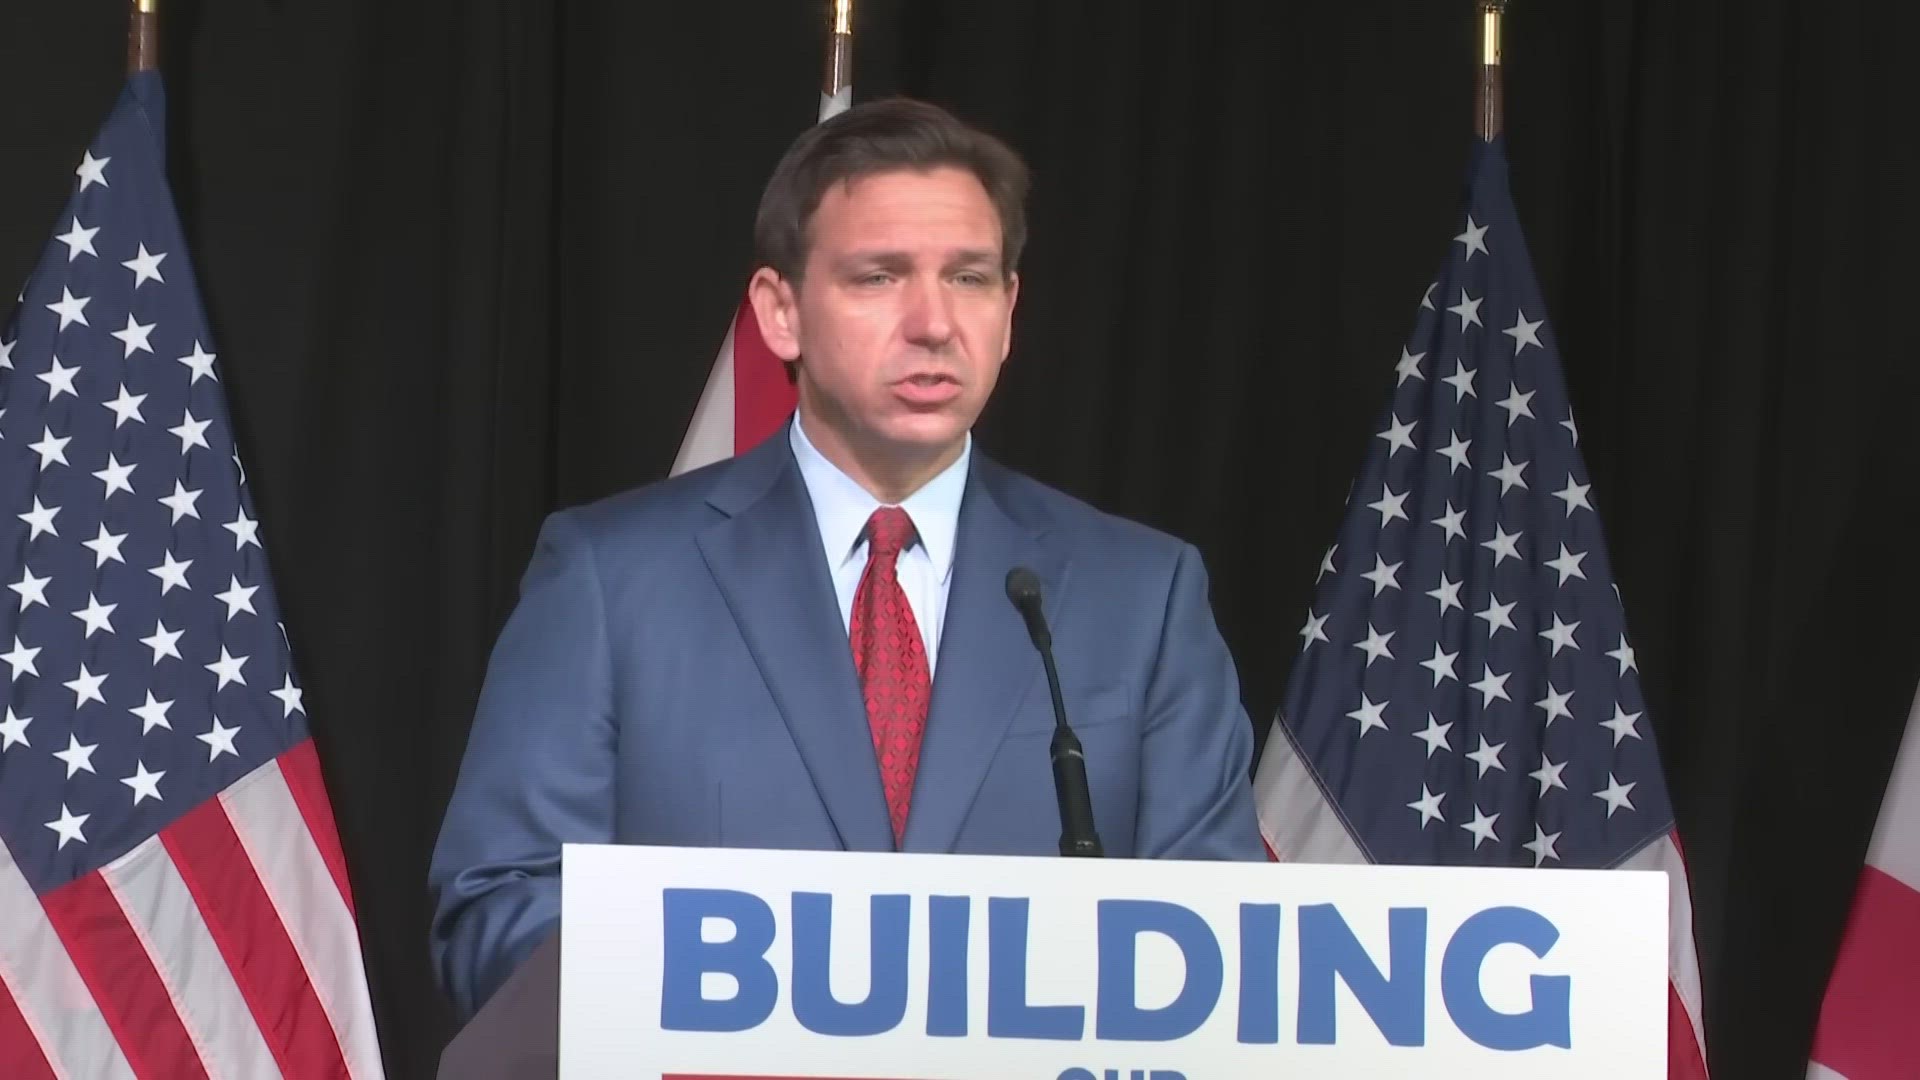 DeSantis described the bill as the "largest ever support for housing in state history."